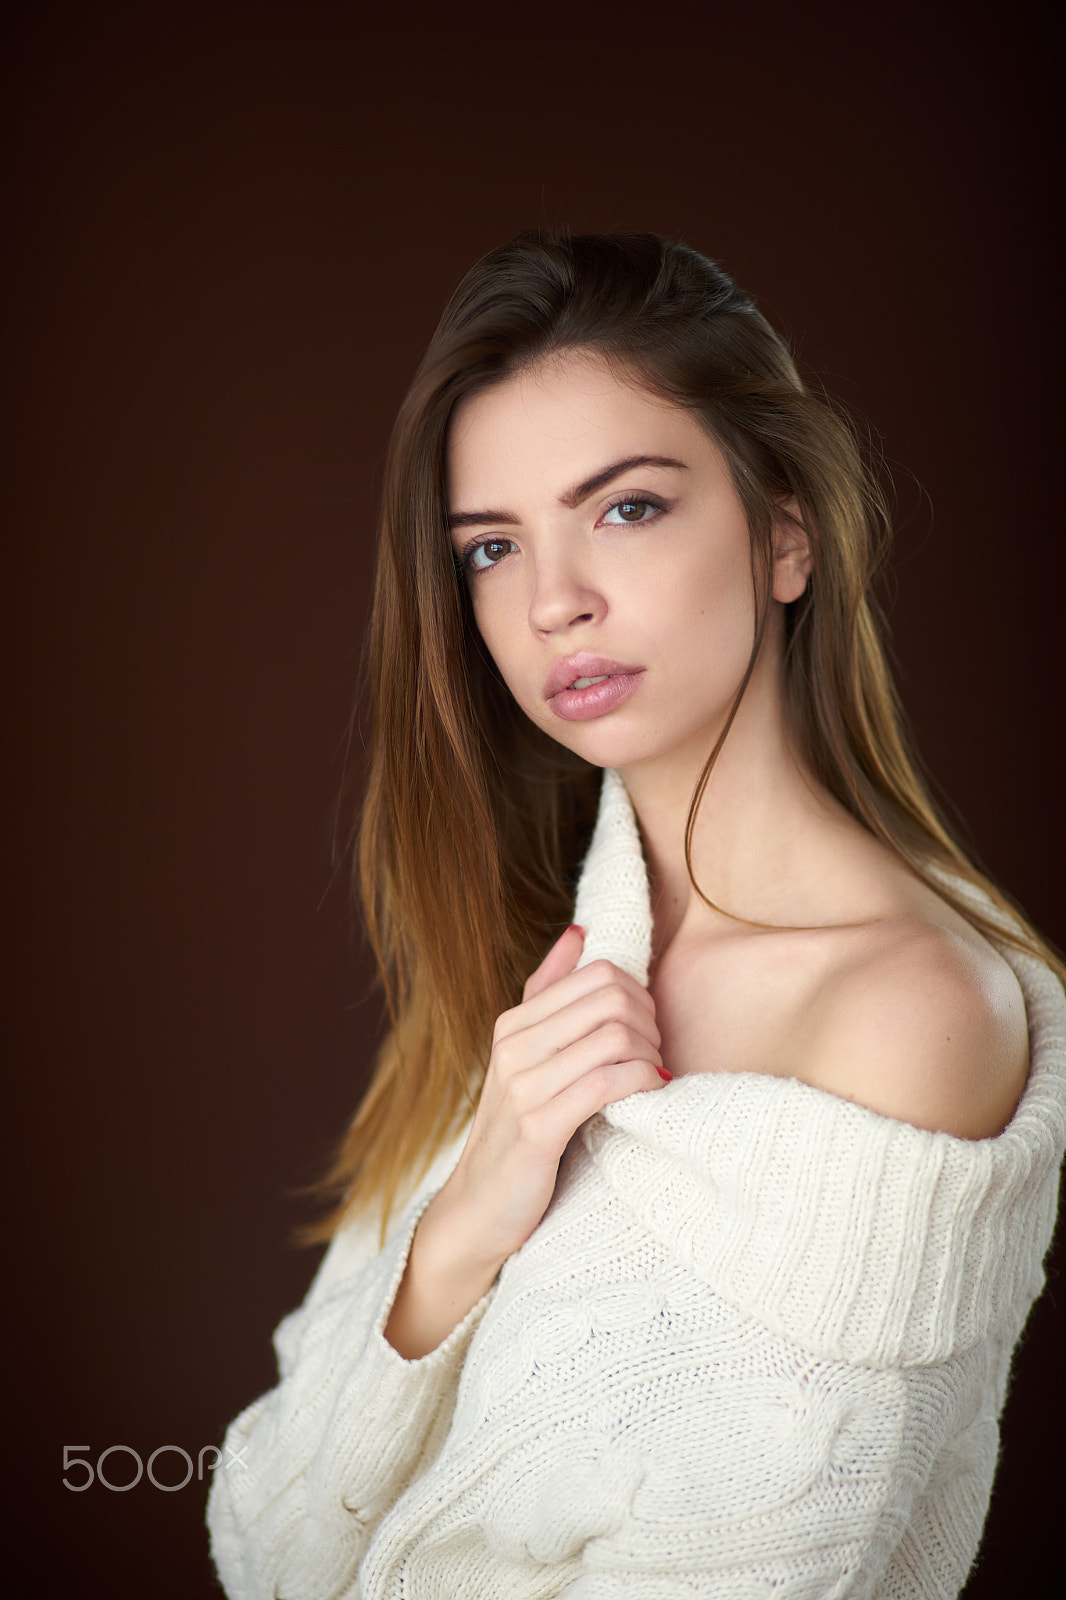 Sony a7 II sample photo. Model posing in studio during classic test shoot photography